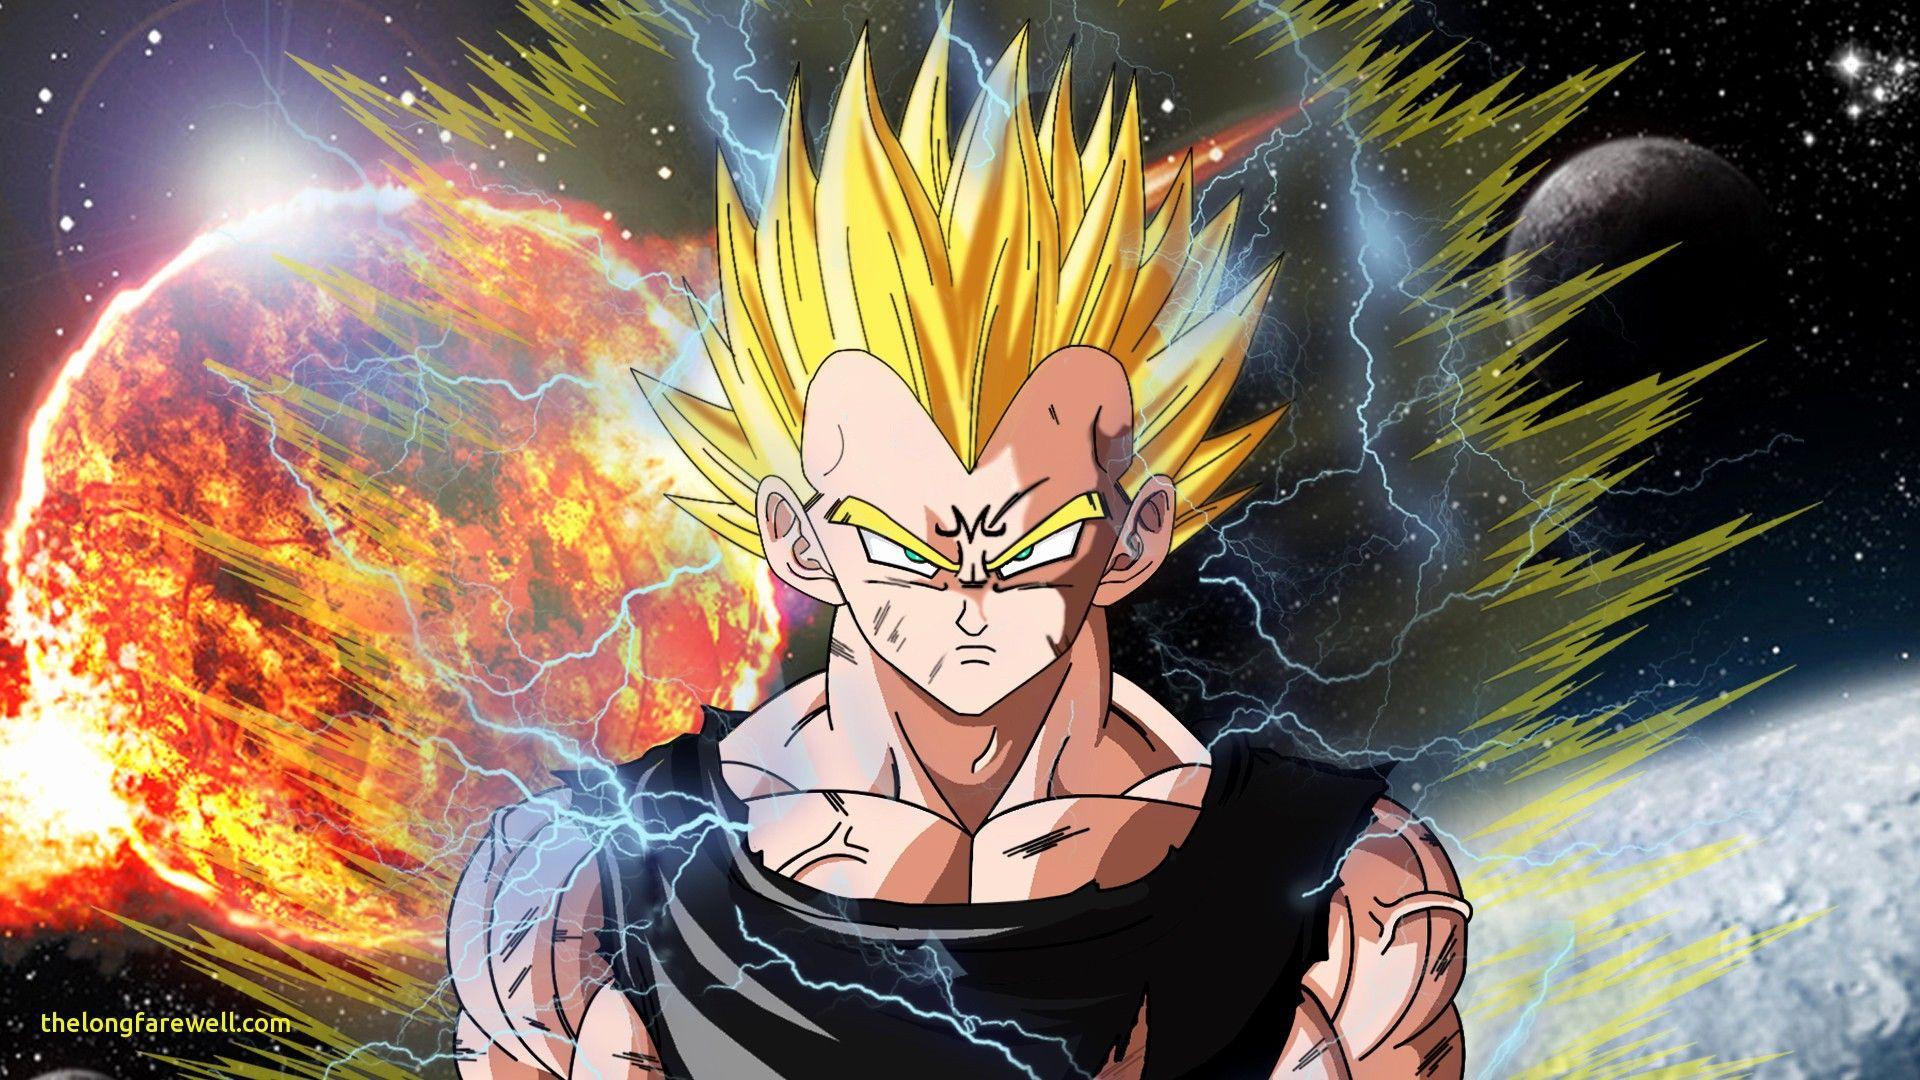 Dbz Live Wallpapers 66 images